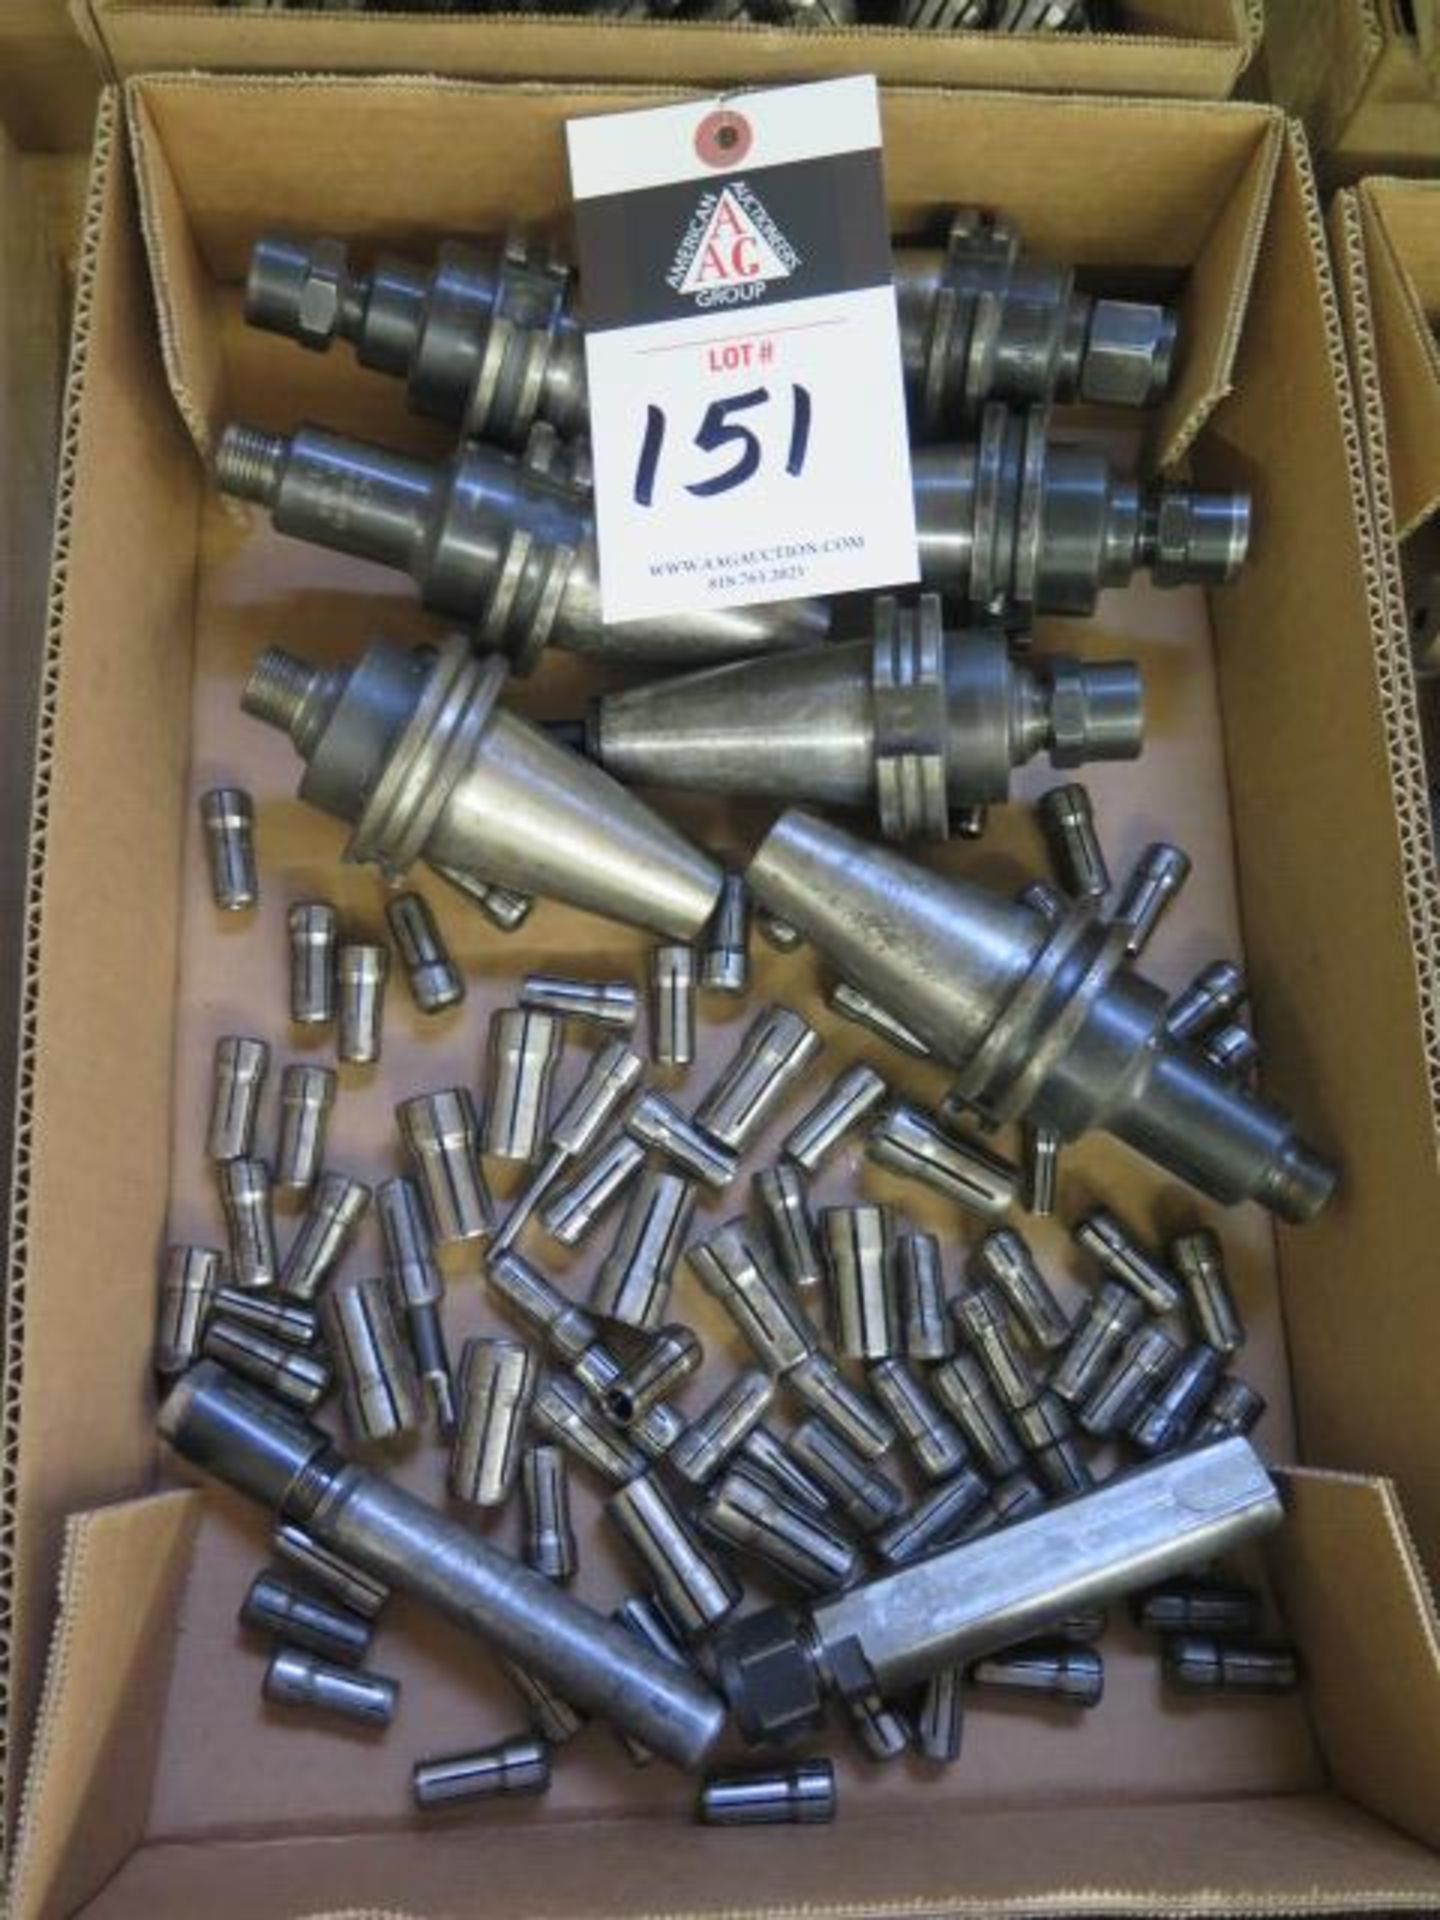 CAT-40 Taper Collet Chucks (7) w/ Flex Collets (SOLD AS-IS - NO WARRANTY) - Image 2 of 2